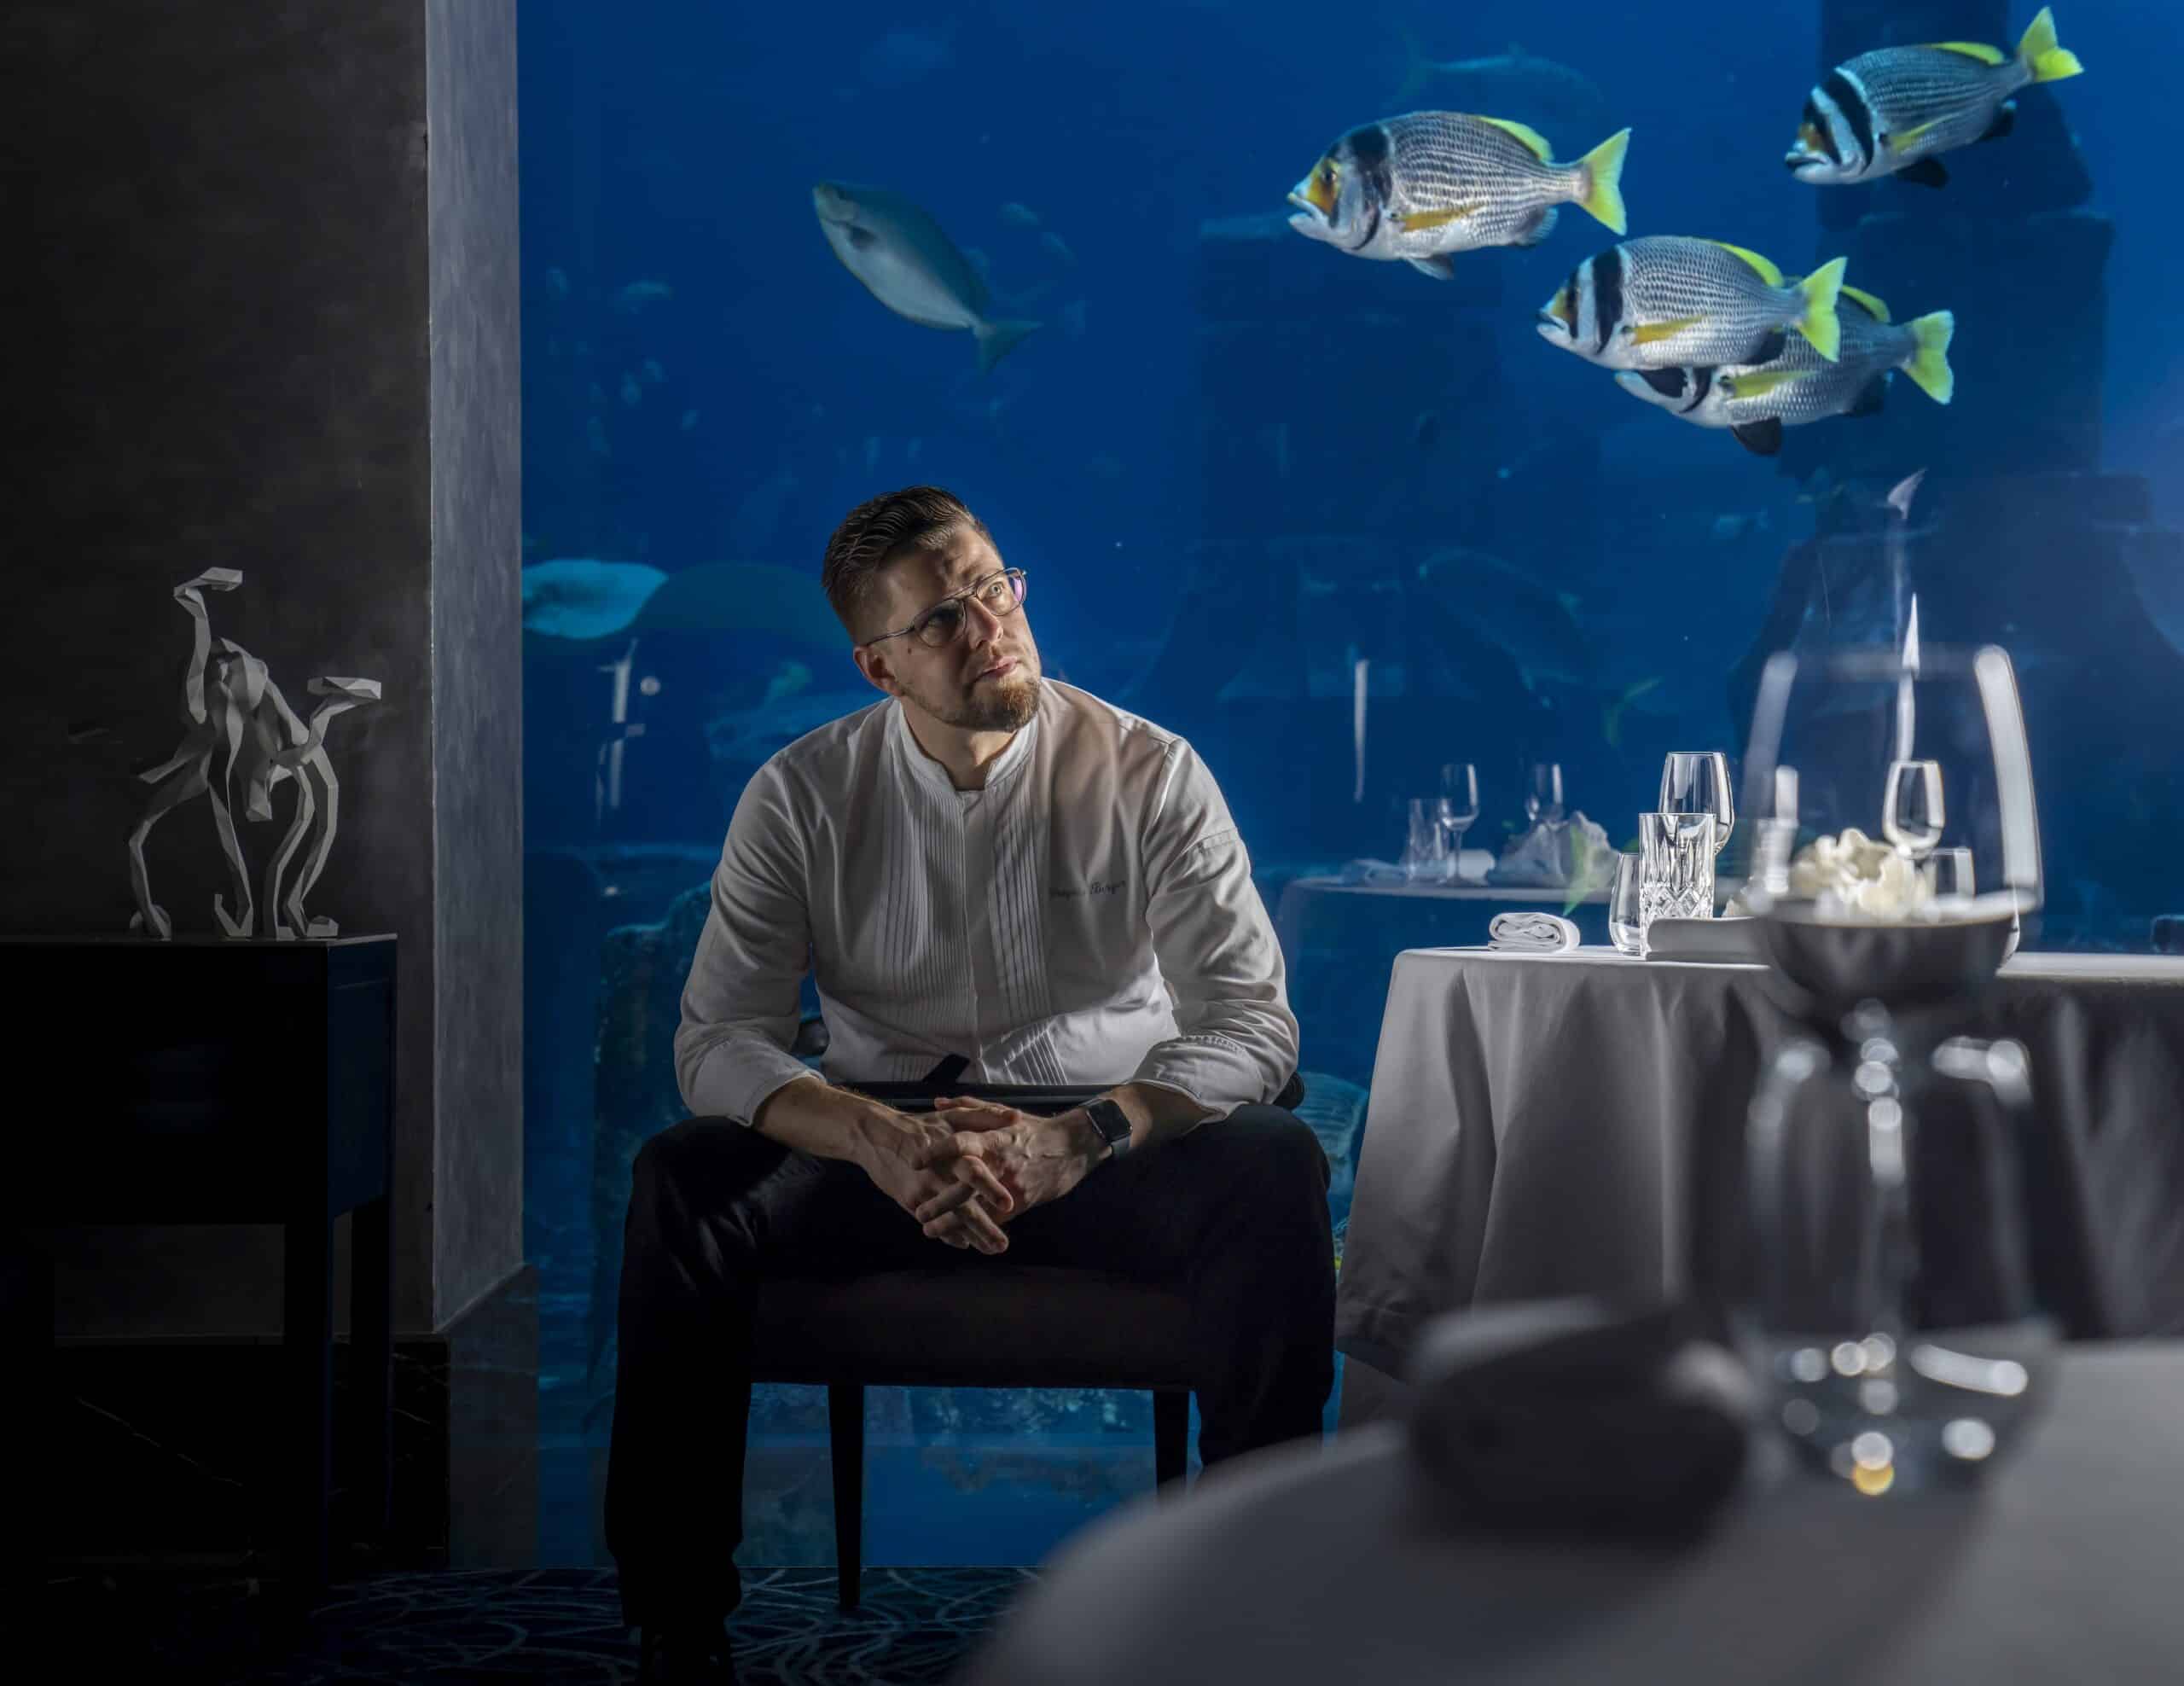 OSSIANO’S CELEBRATED CHEF GRÉGOIRE BERGER COLLABORATES WITH  ERIC VILDGAARD OF THE TWO MICHELIN-STARRED JORDNÆR FOR AN UNFORGETTABLE DINING EXPERIENCE